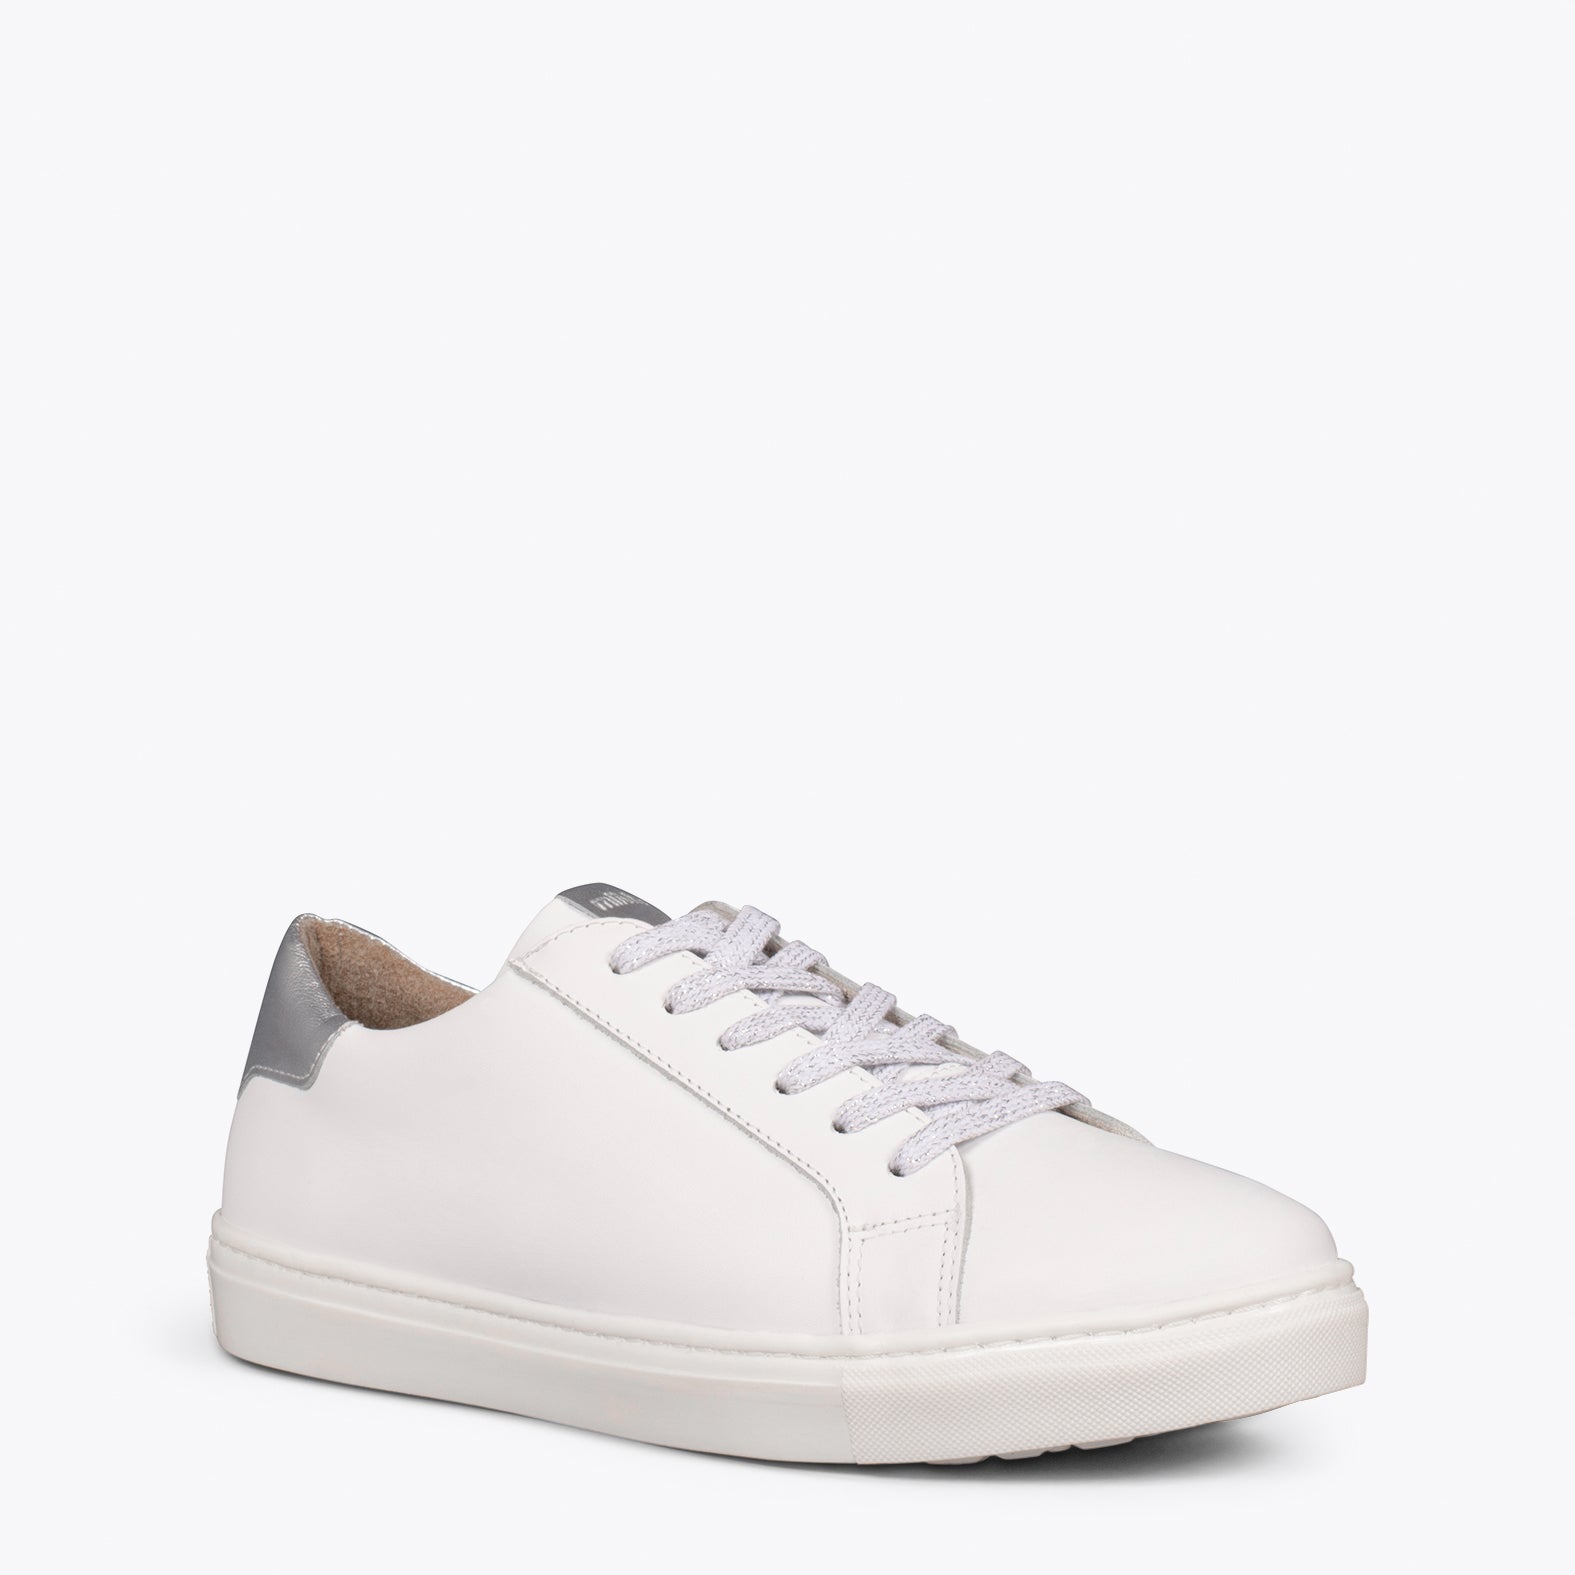 SNEAKER – WHITE and SILVER elegant lifestyle sneakers